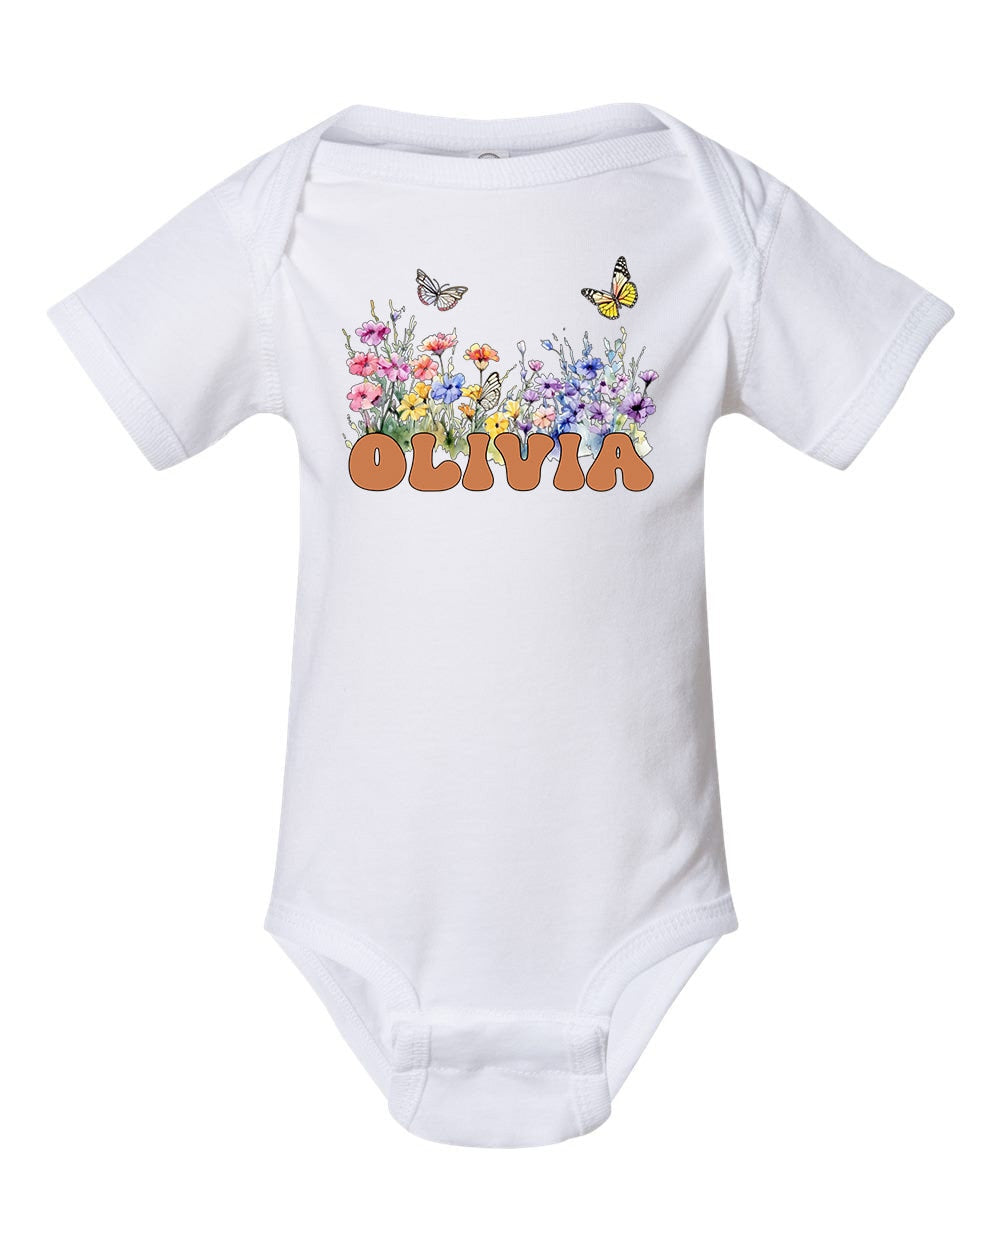 Infant bodysuit White  color with wildflower 